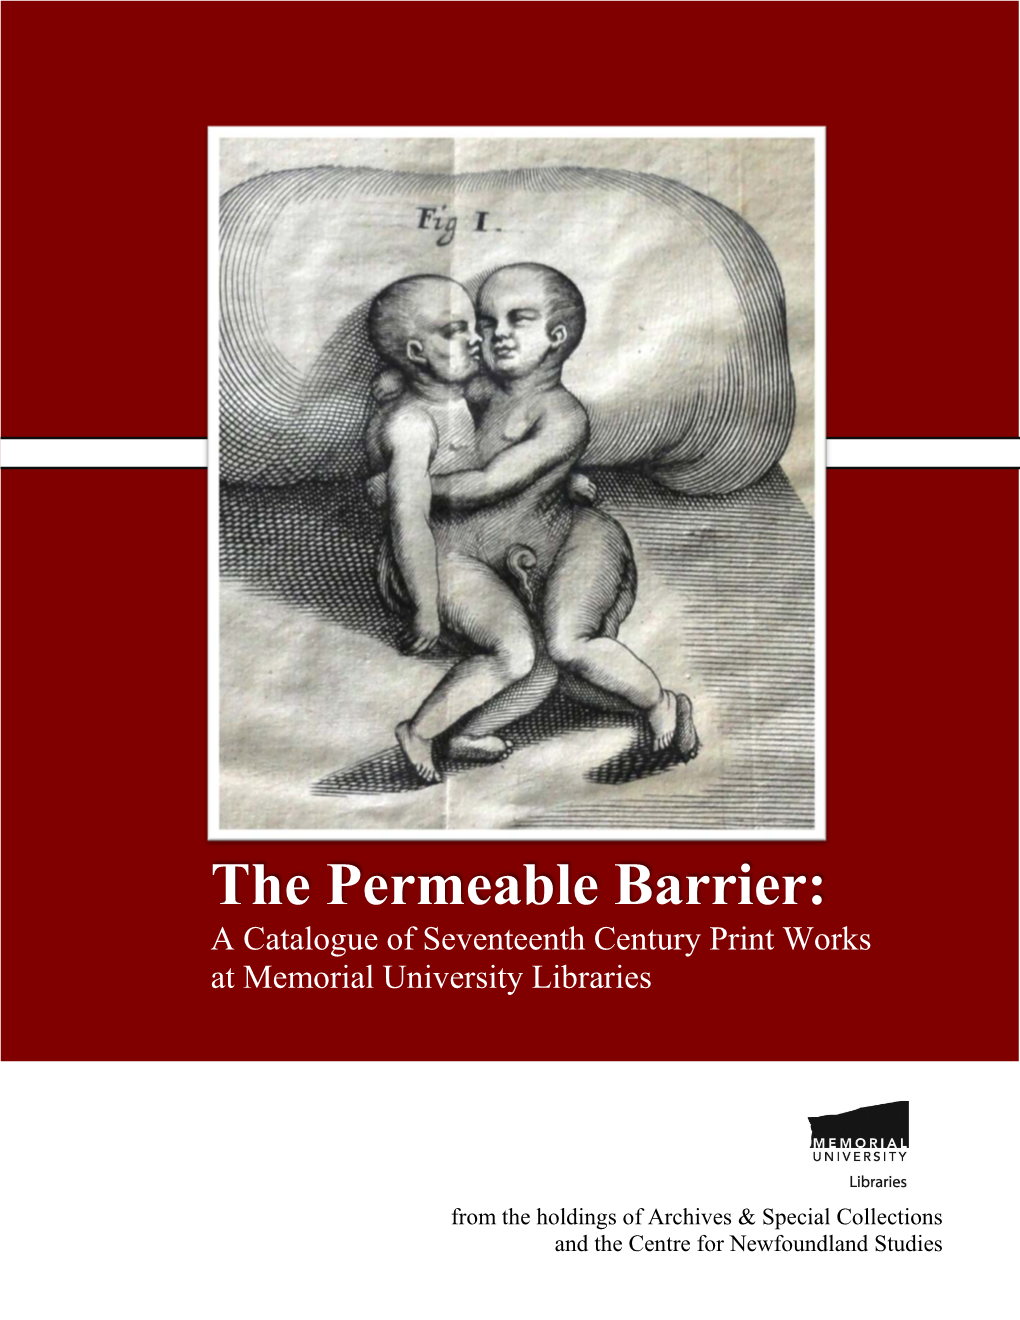 The Permeable Barrier: Seventeenth Century Print Works at Memorial University Libraries